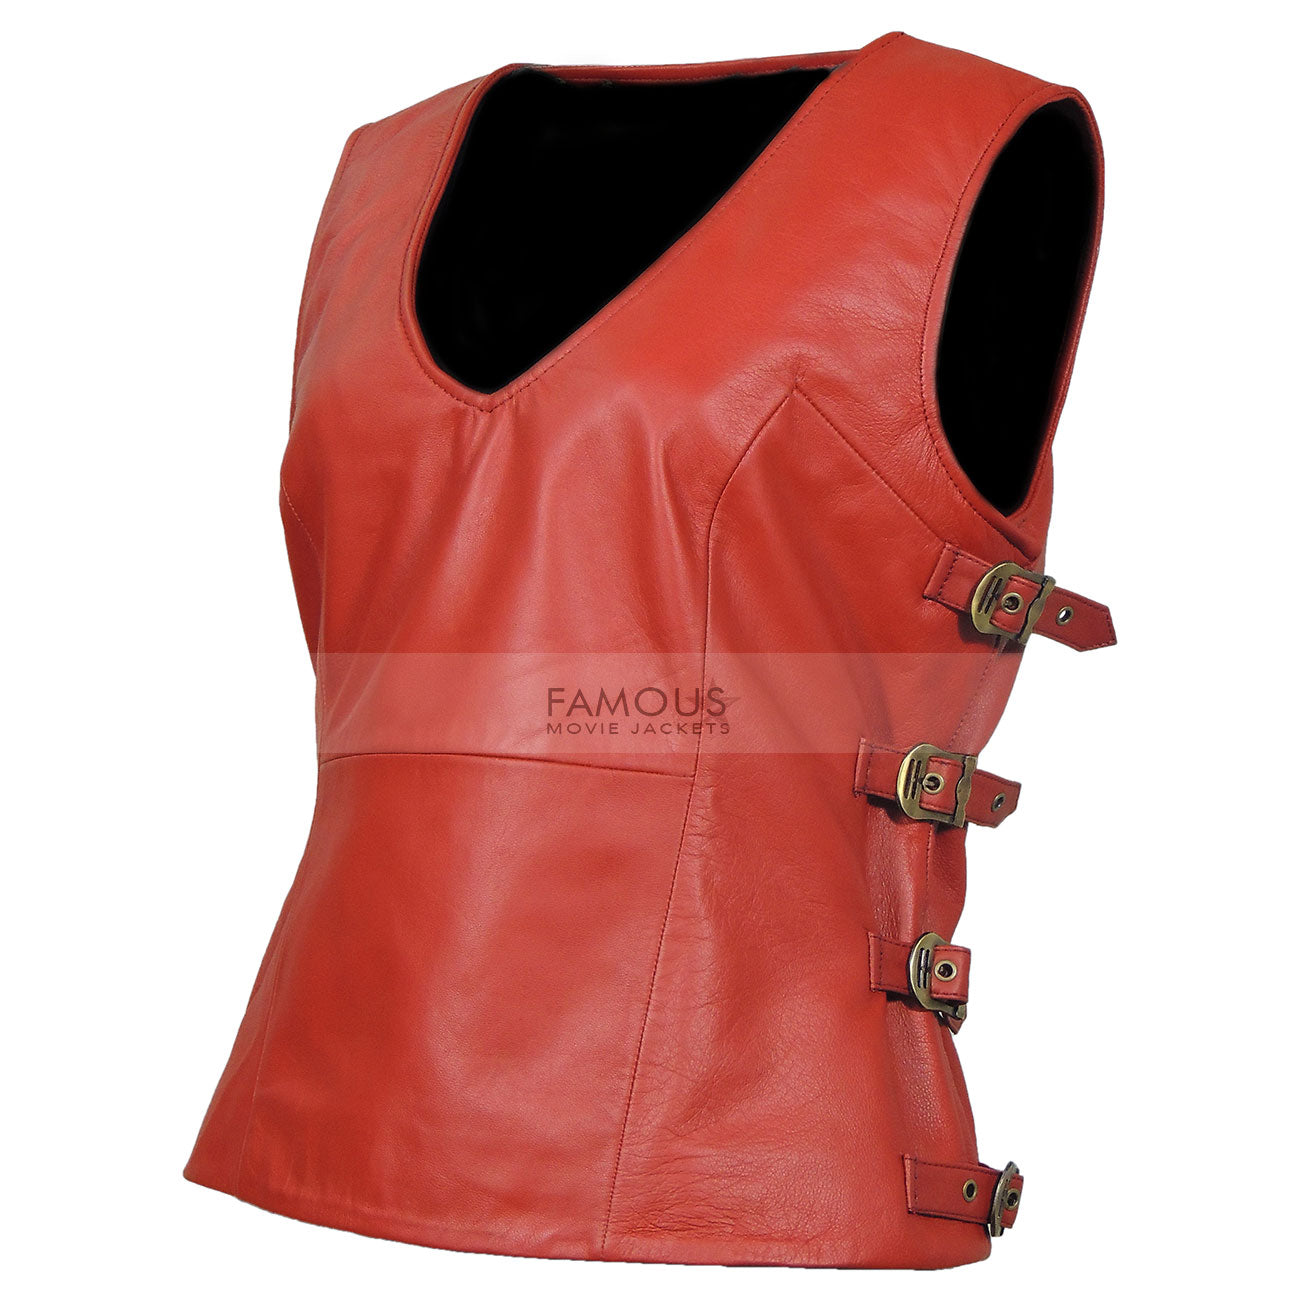 Firefly TV Series Zoe Washburne (Gina) Brown Leather Vest